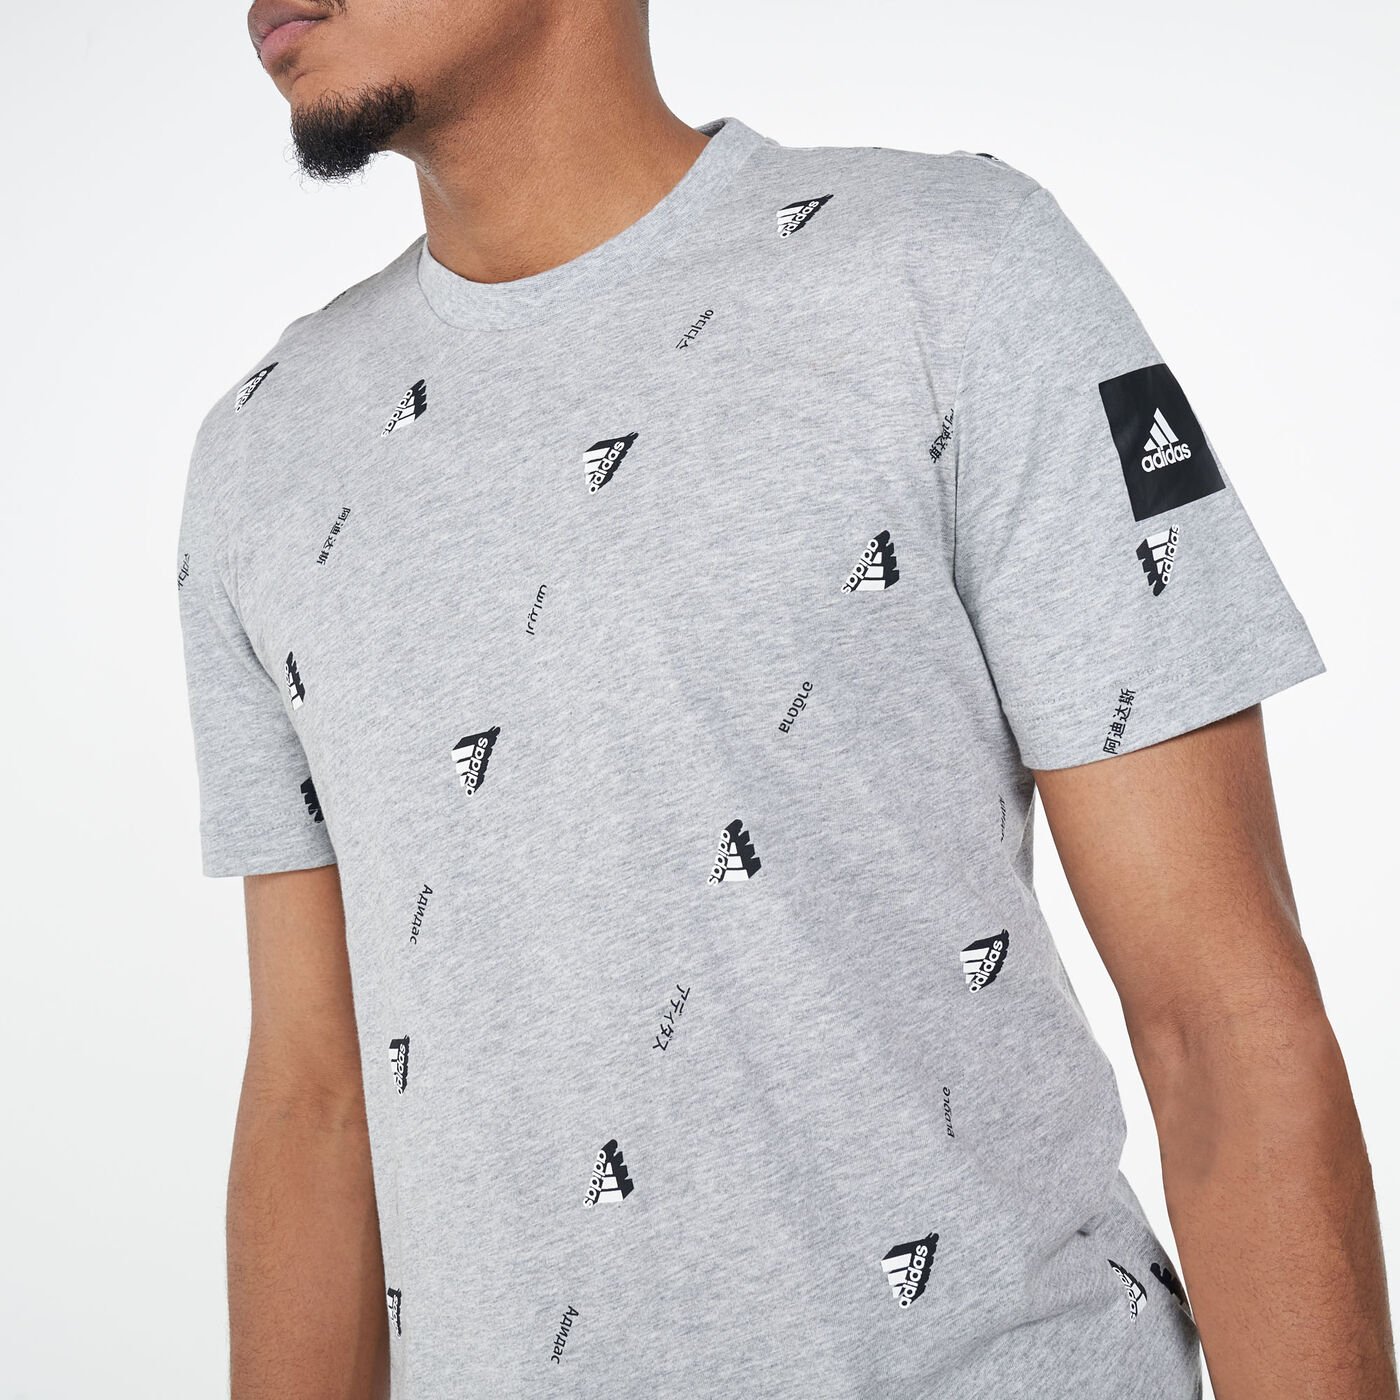 Men's Must Haves Graphic T-Shirt